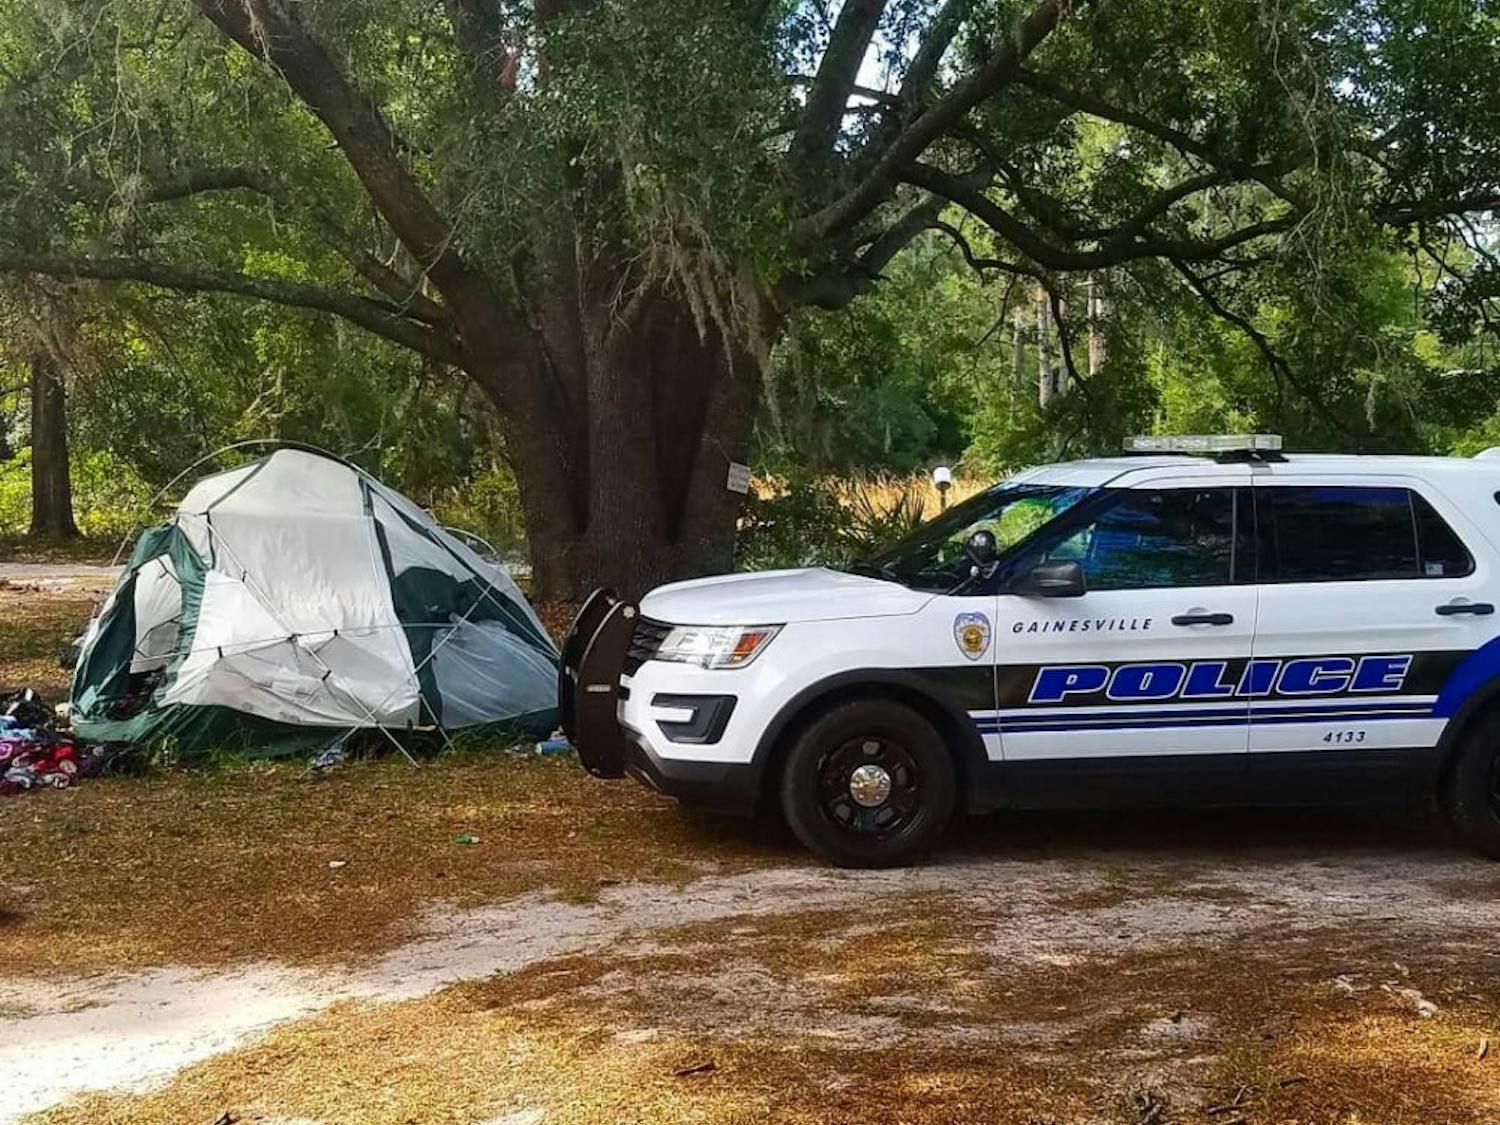 Gainesville Police assisted the Florida Department of Corrections in communicating with members of the encampment on FDC property.
&nbsp;